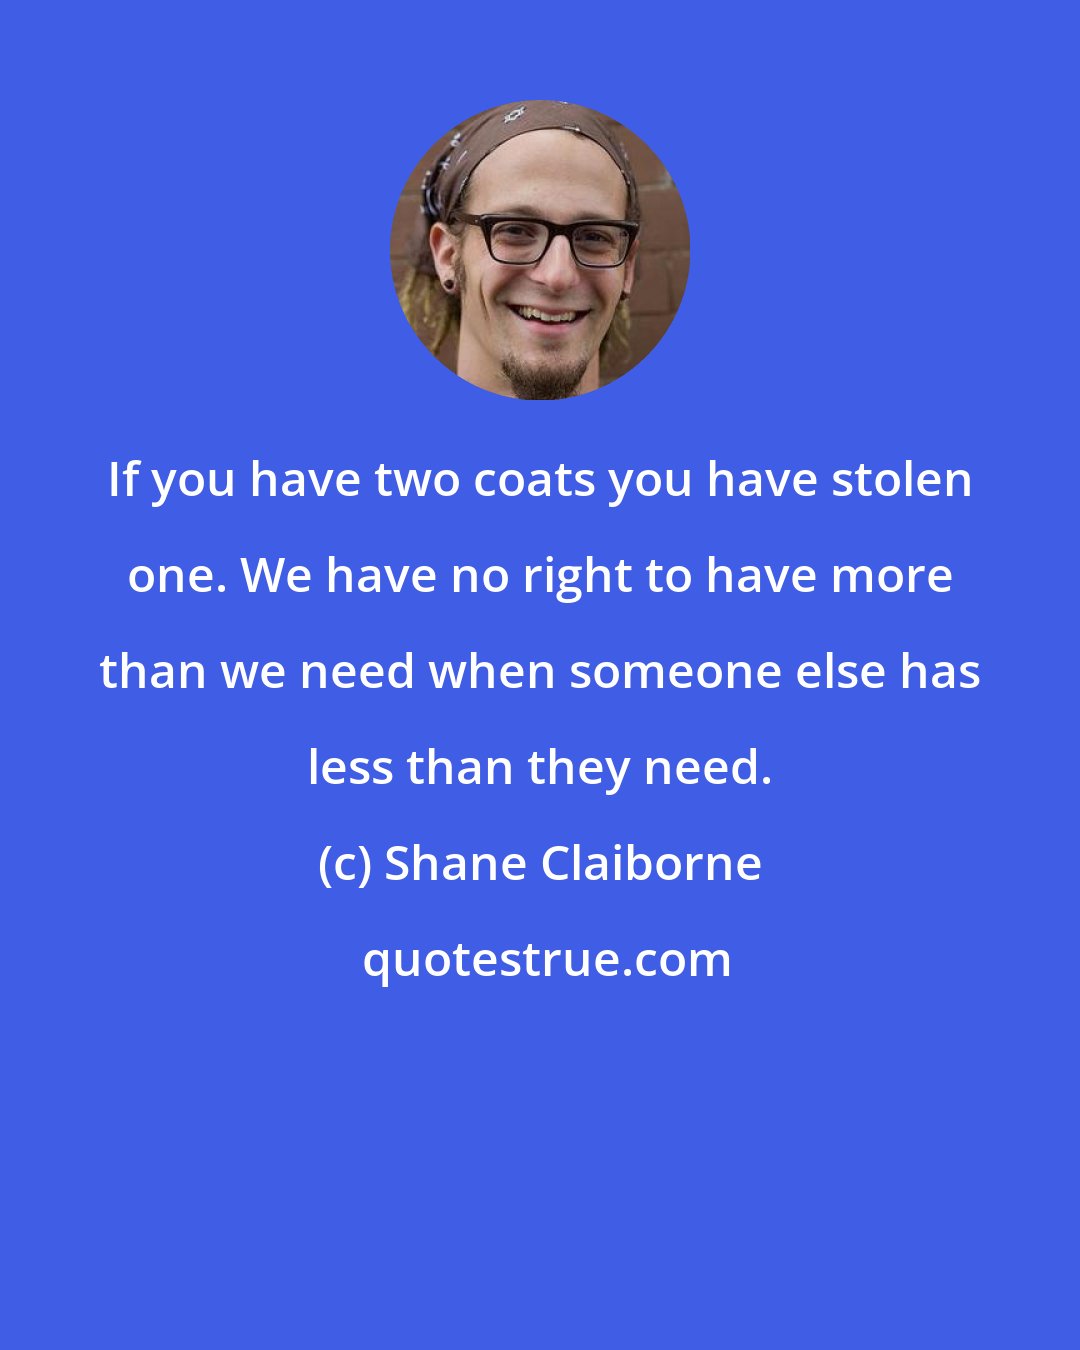 Shane Claiborne: If you have two coats you have stolen one. We have no right to have more than we need when someone else has less than they need.